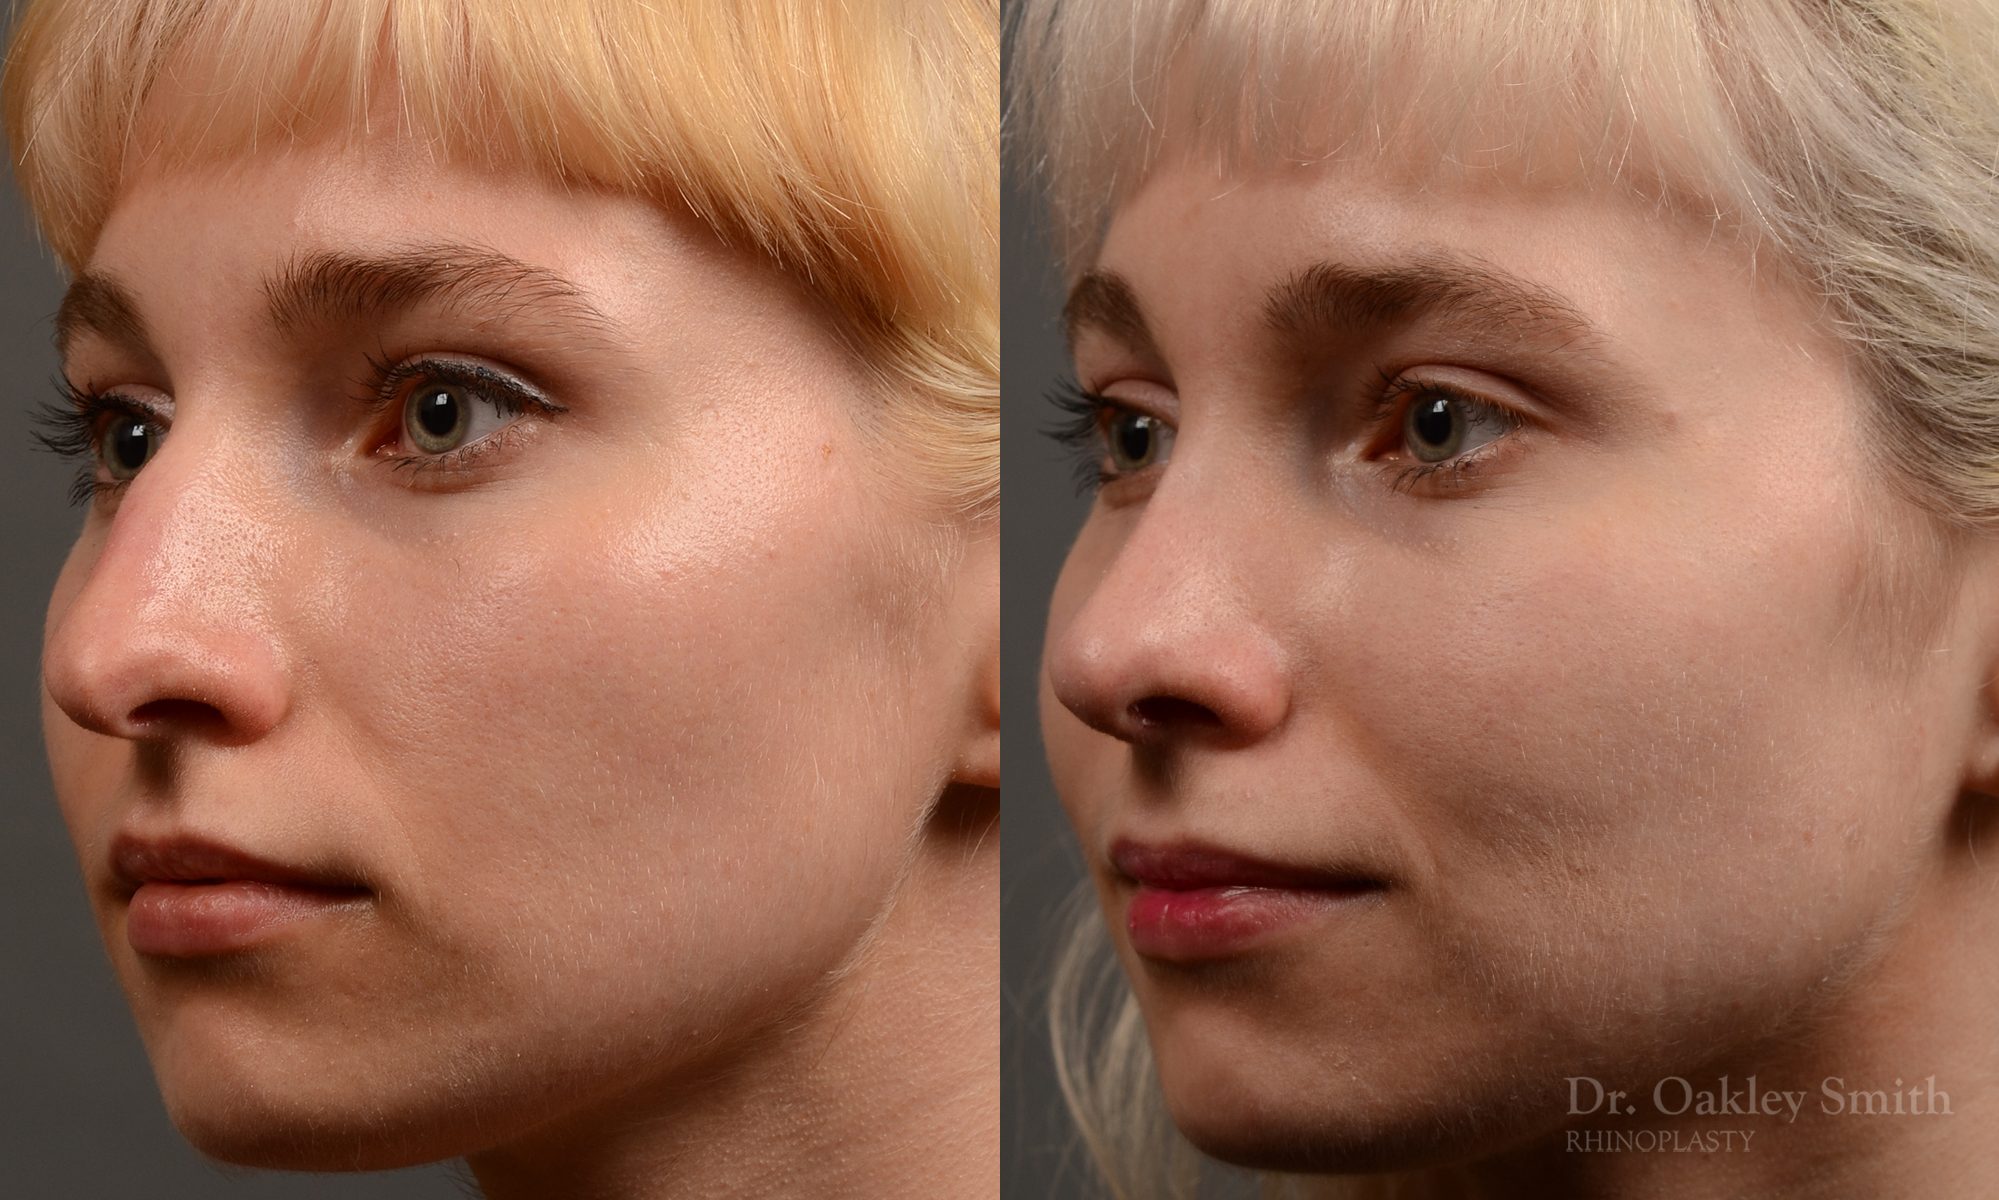 398 - Expert Rhinoplasty nose job surgery to reduce the size of this womans nose.